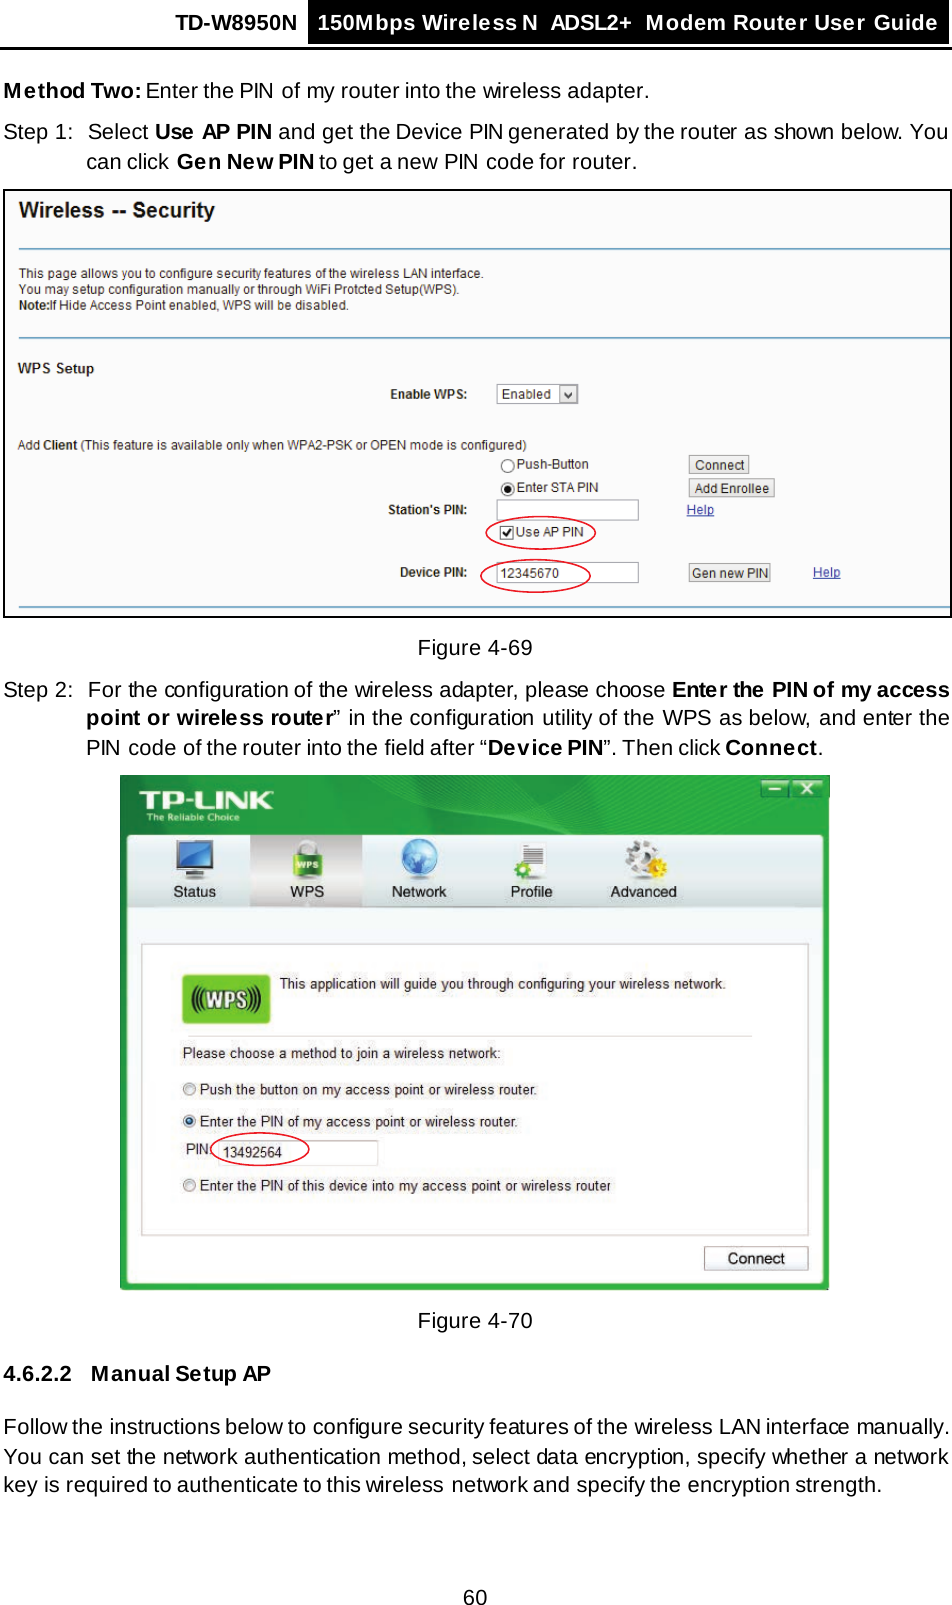 TD-W8950N 150Mbps Wireless N  ADSL2+ Modem Router User Guide  60 Method Two: Enter the PIN  of my router into the wireless adapter. Step 1: Select Use AP PIN and get the Device PIN generated by the router as shown below. You can click Gen New PIN to get a new  PIN  code for router.  Figure 4-69 Step 2: For the configuration of the wireless adapter, please choose Enter the PIN of my access point or wireless router” in the configuration utility of the WPS as below, and enter the PIN  code of the router into the field after “Device PIN”. Then click Connect.  Figure 4-70 4.6.2.2 Manual Setup AP Follow the instructions below to configure security features of the wireless LAN interface manually. You can set the network authentication method, select data encryption, specify whether a network key is required to authenticate to this wireless network and specify the encryption strength. 